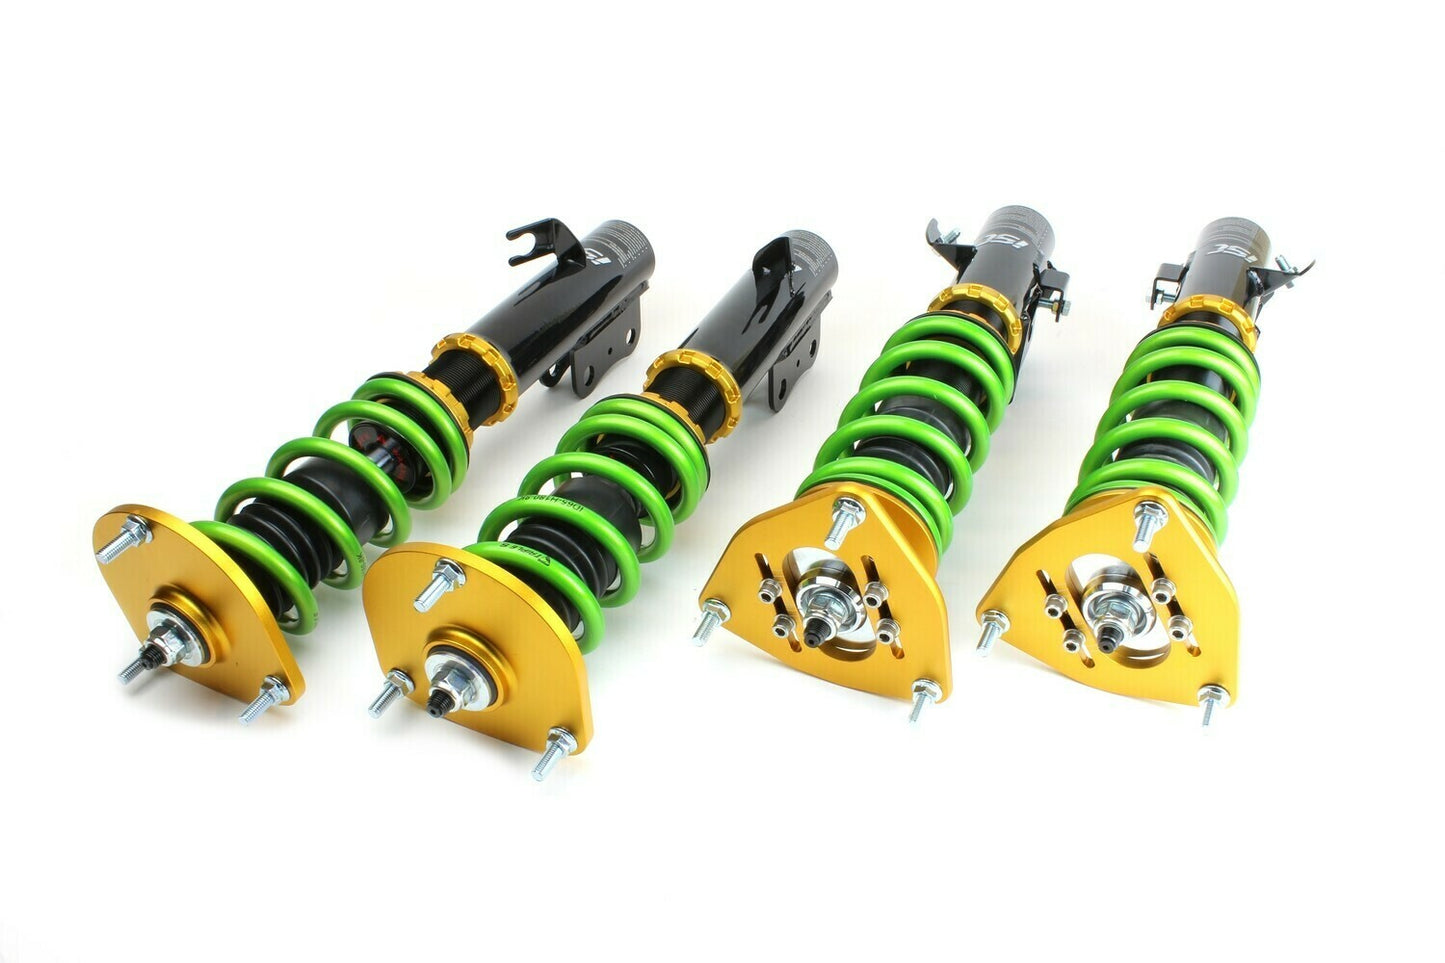 ACURA RSX DC5 CHASSIS 02-06 ISC N1 V2 COILOVER SUSPENSION WITH COILOVER COVERS